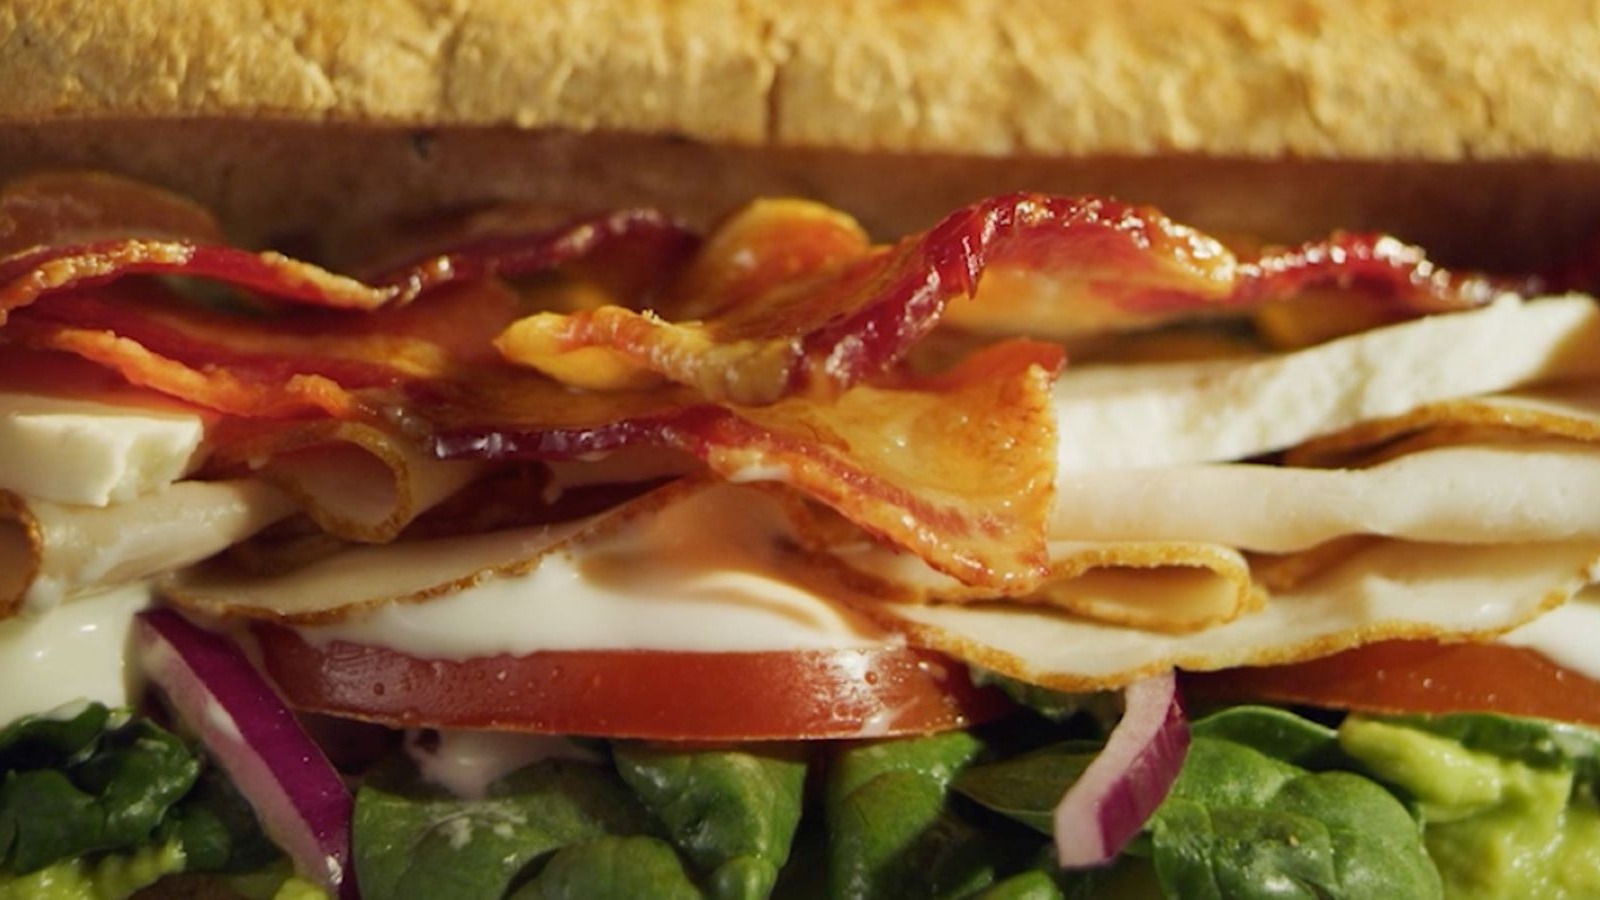 Subway's Revamped Menu Will Look Familiar To Sandwich Fans